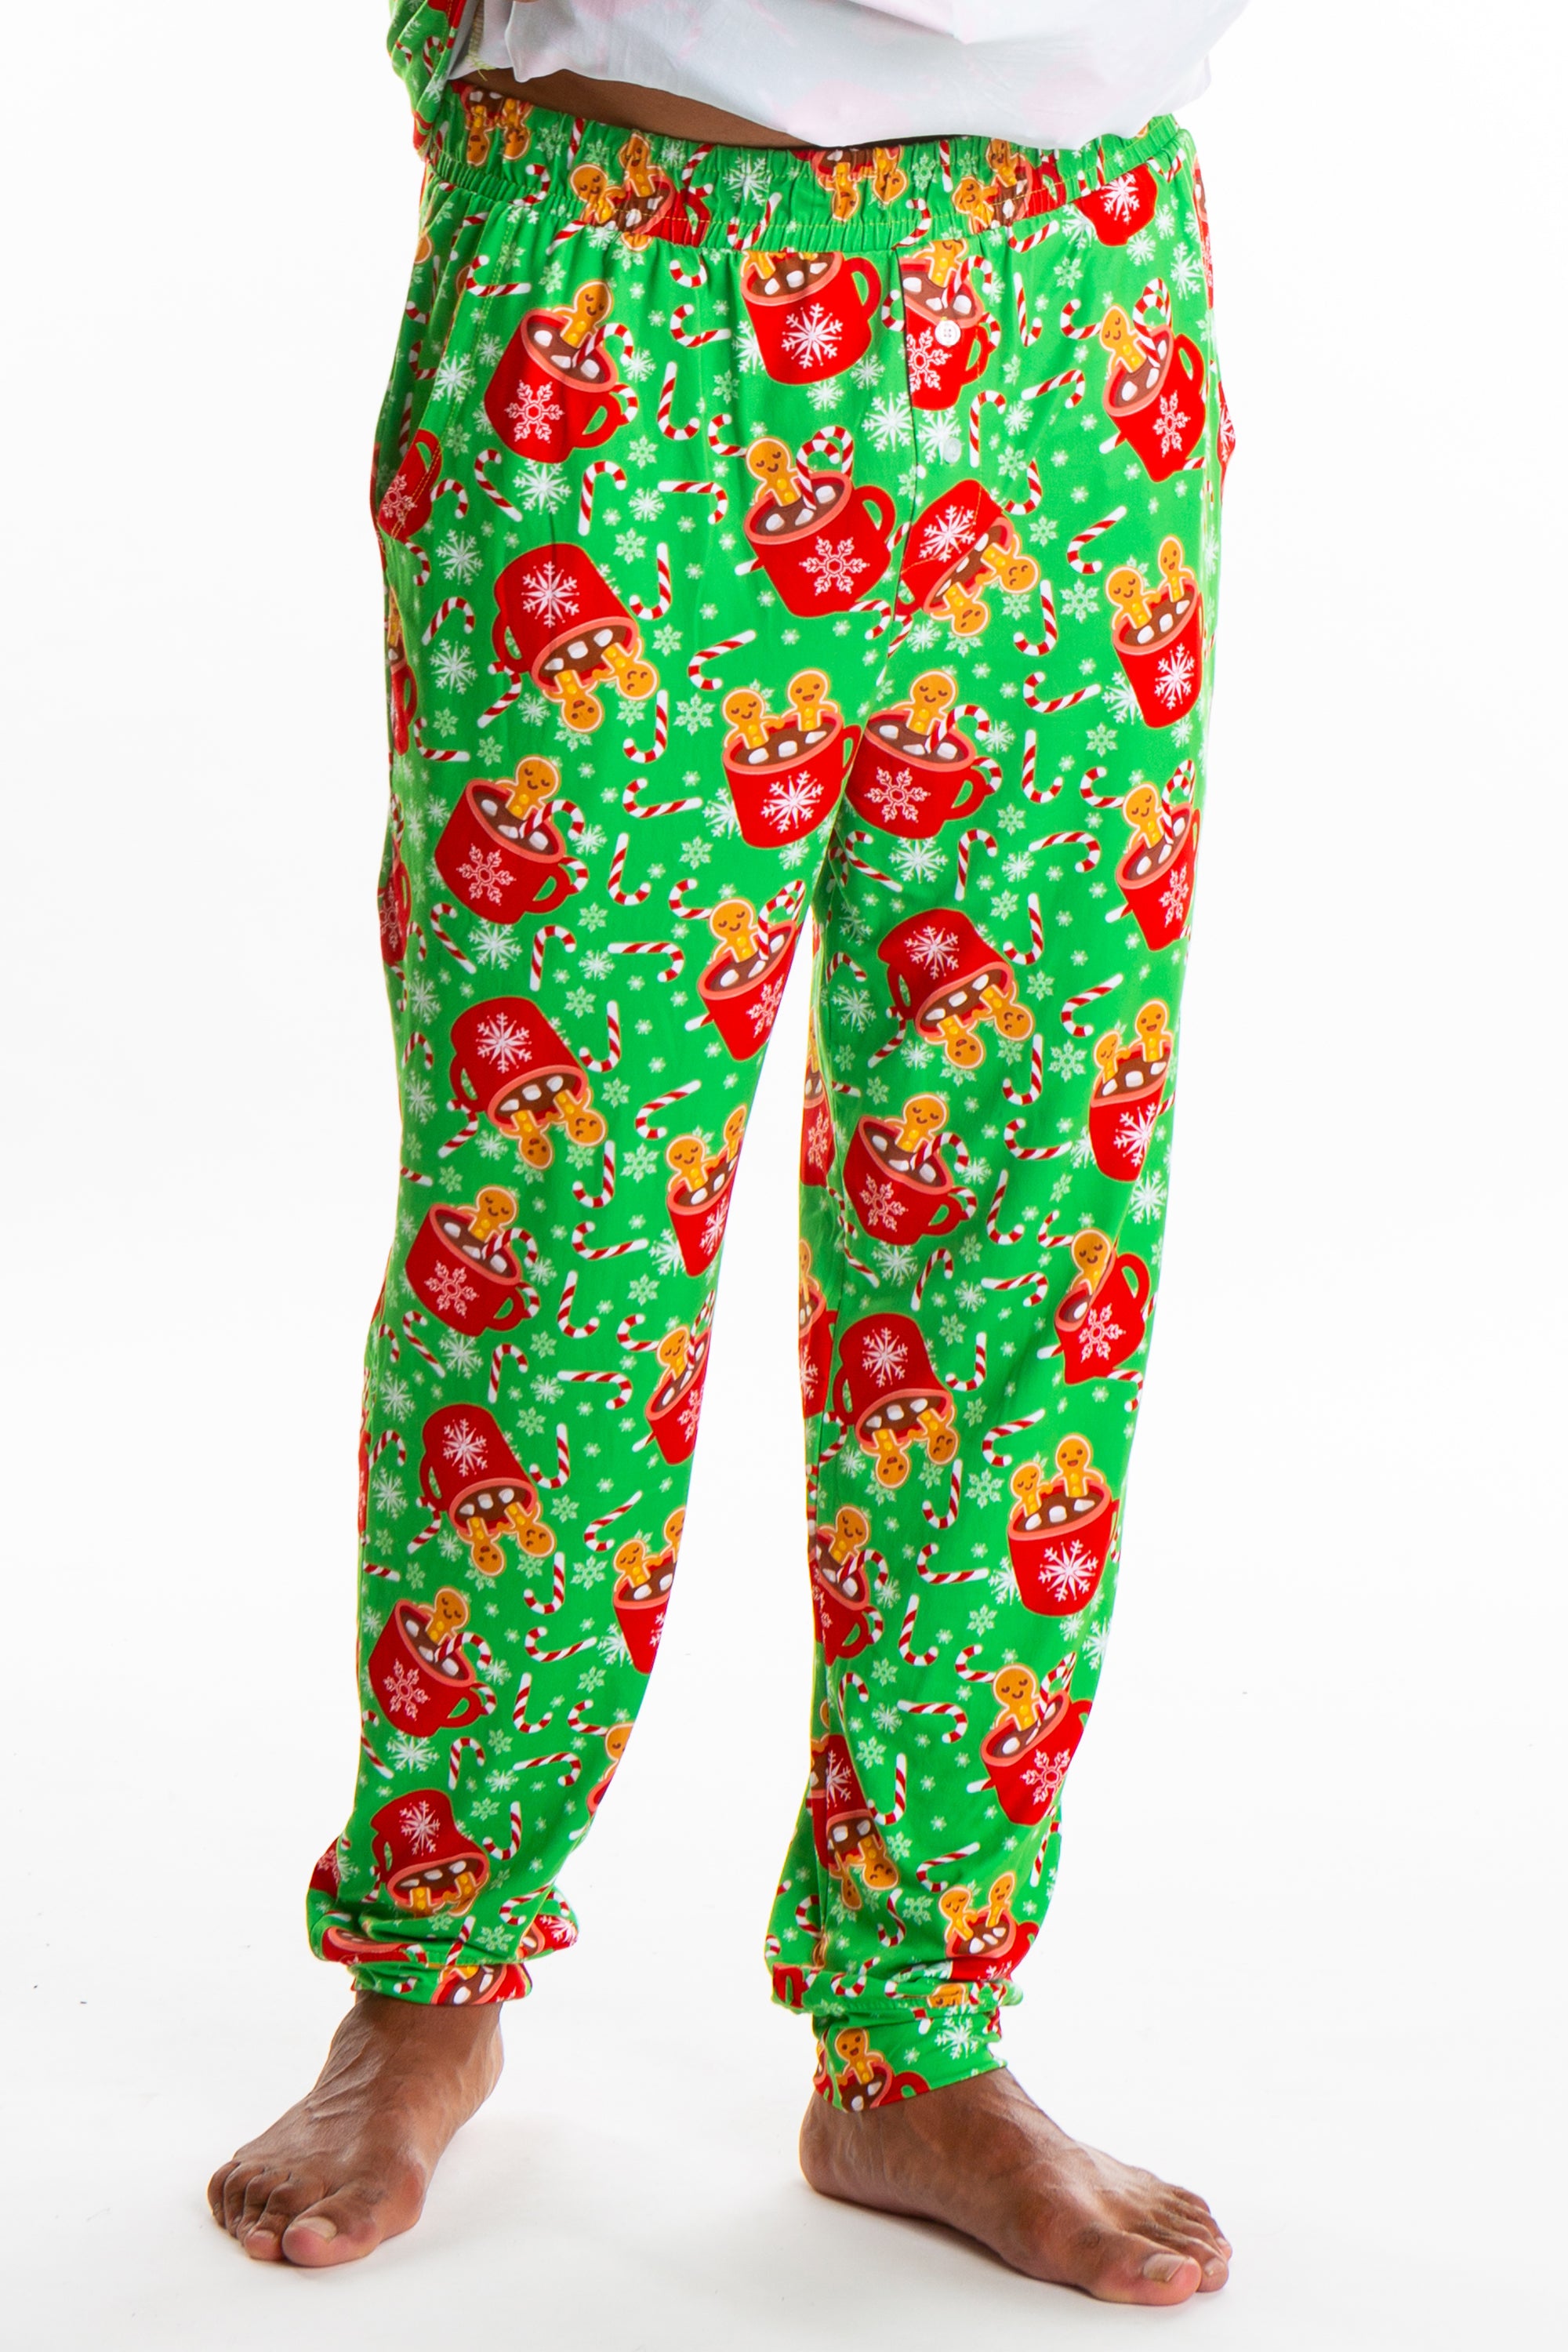 Gingerbread Adult Pajama Bottoms | The Hot Cocoa-cuzzi